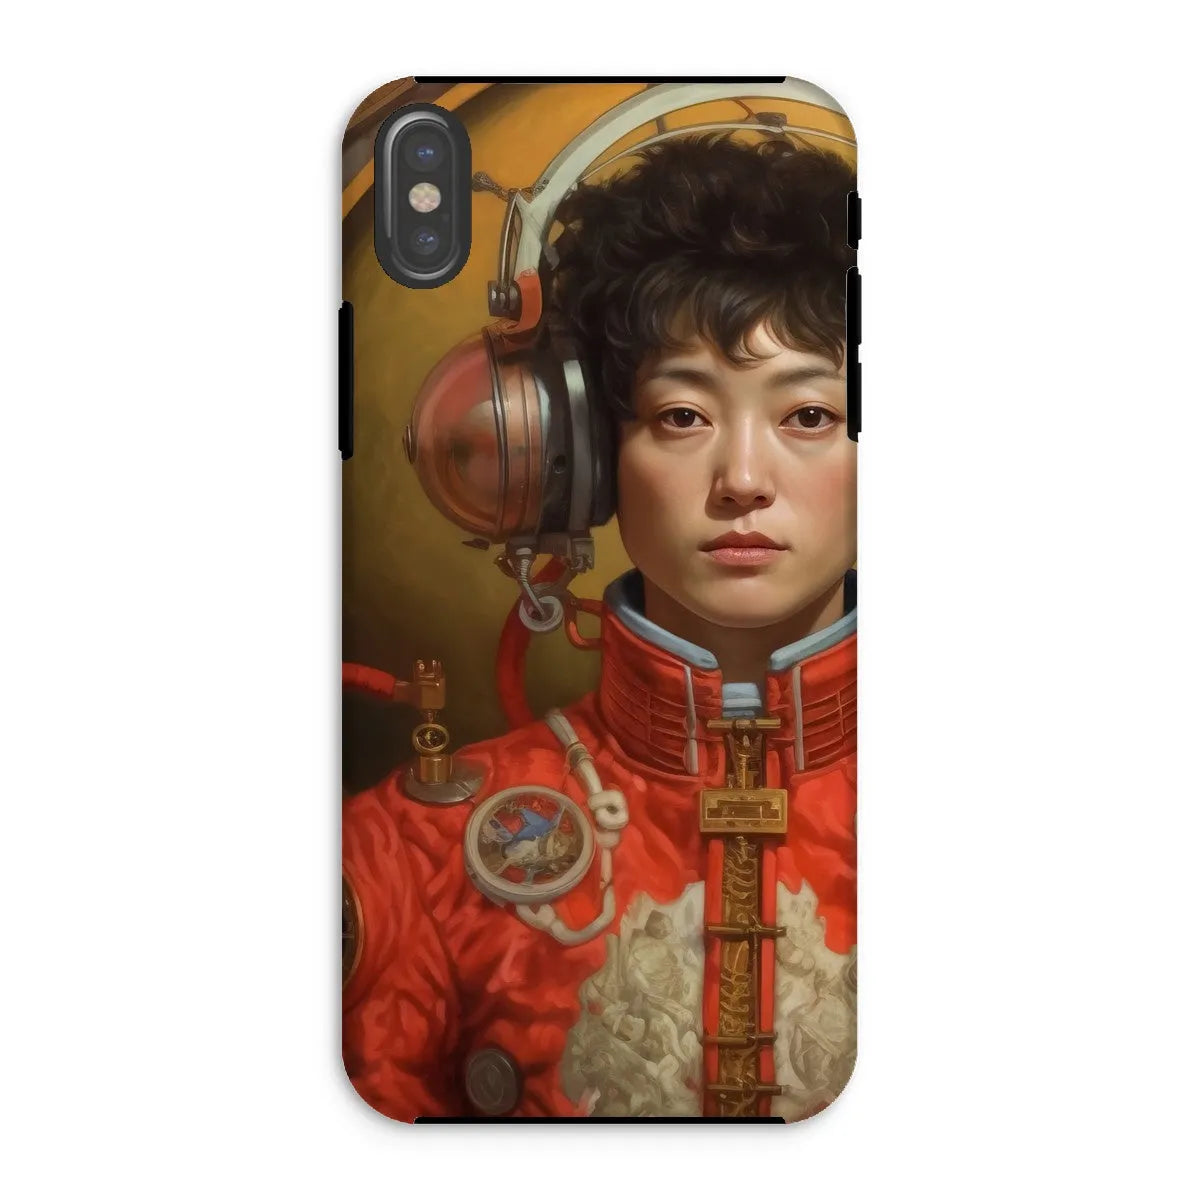 Mùchén - Gay Chinese Astronaut Aesthetic Phone Case - Iphone Xs / Matte - Mobile Phone Cases - Aesthetic Art